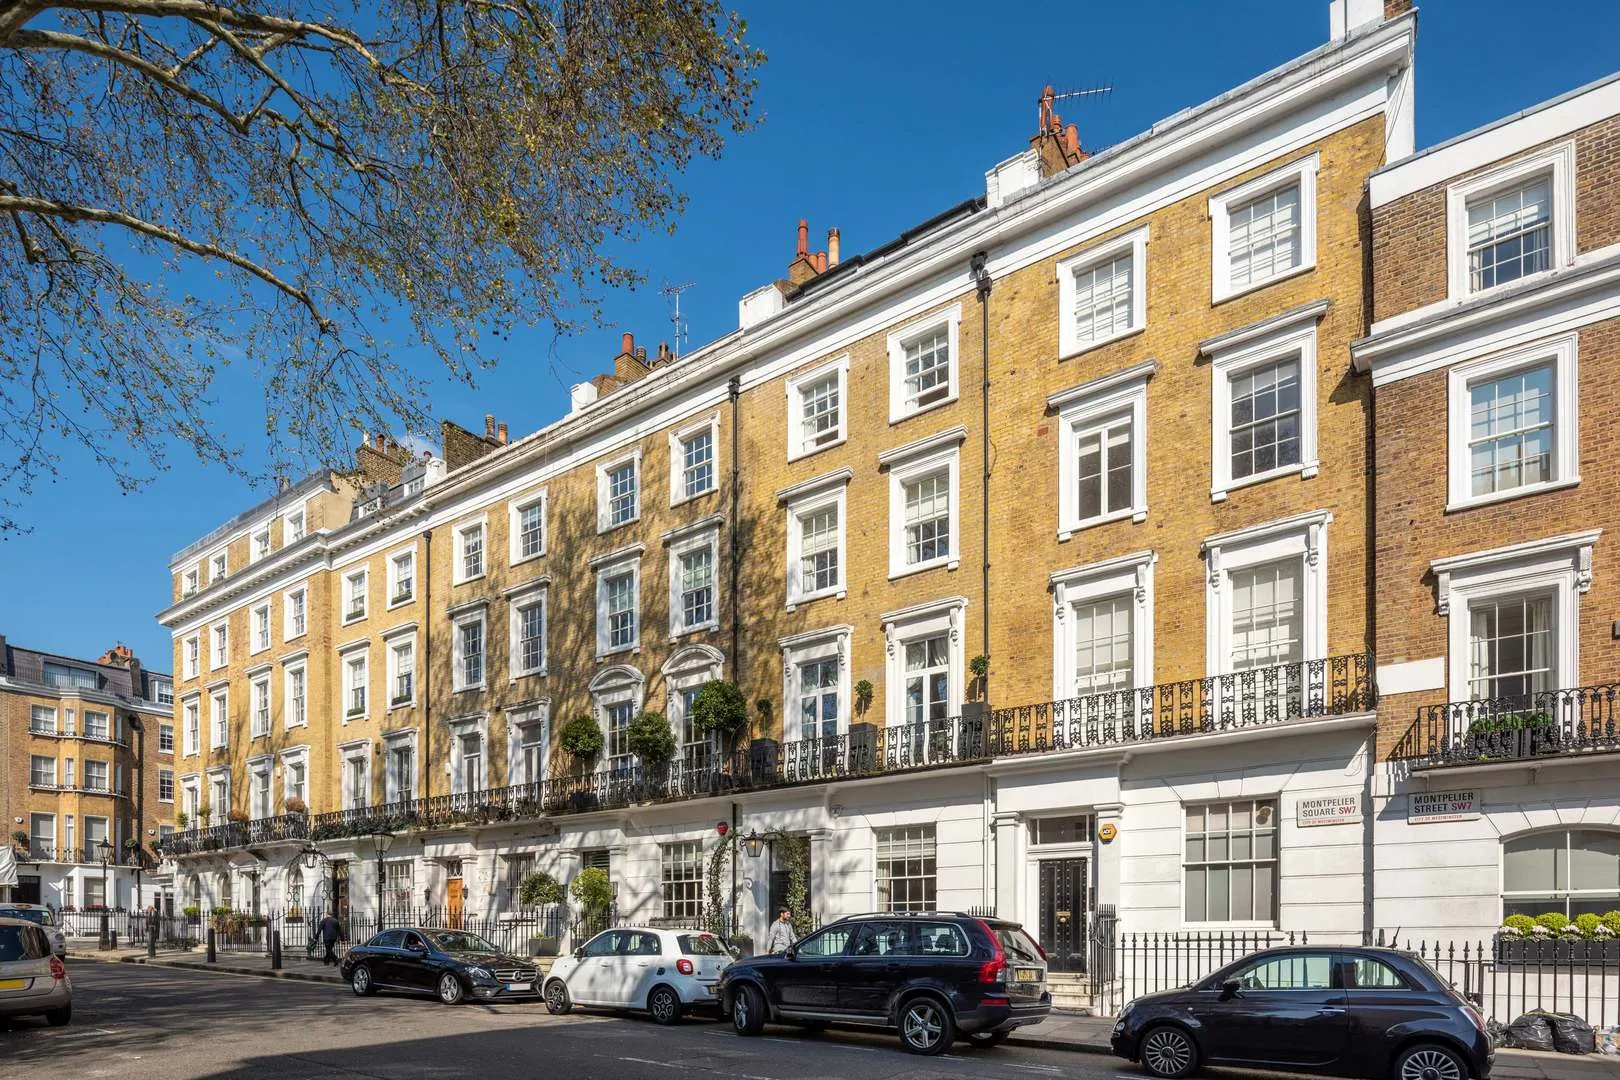 Montpelier Square, holiday home in Knightsbridge, London